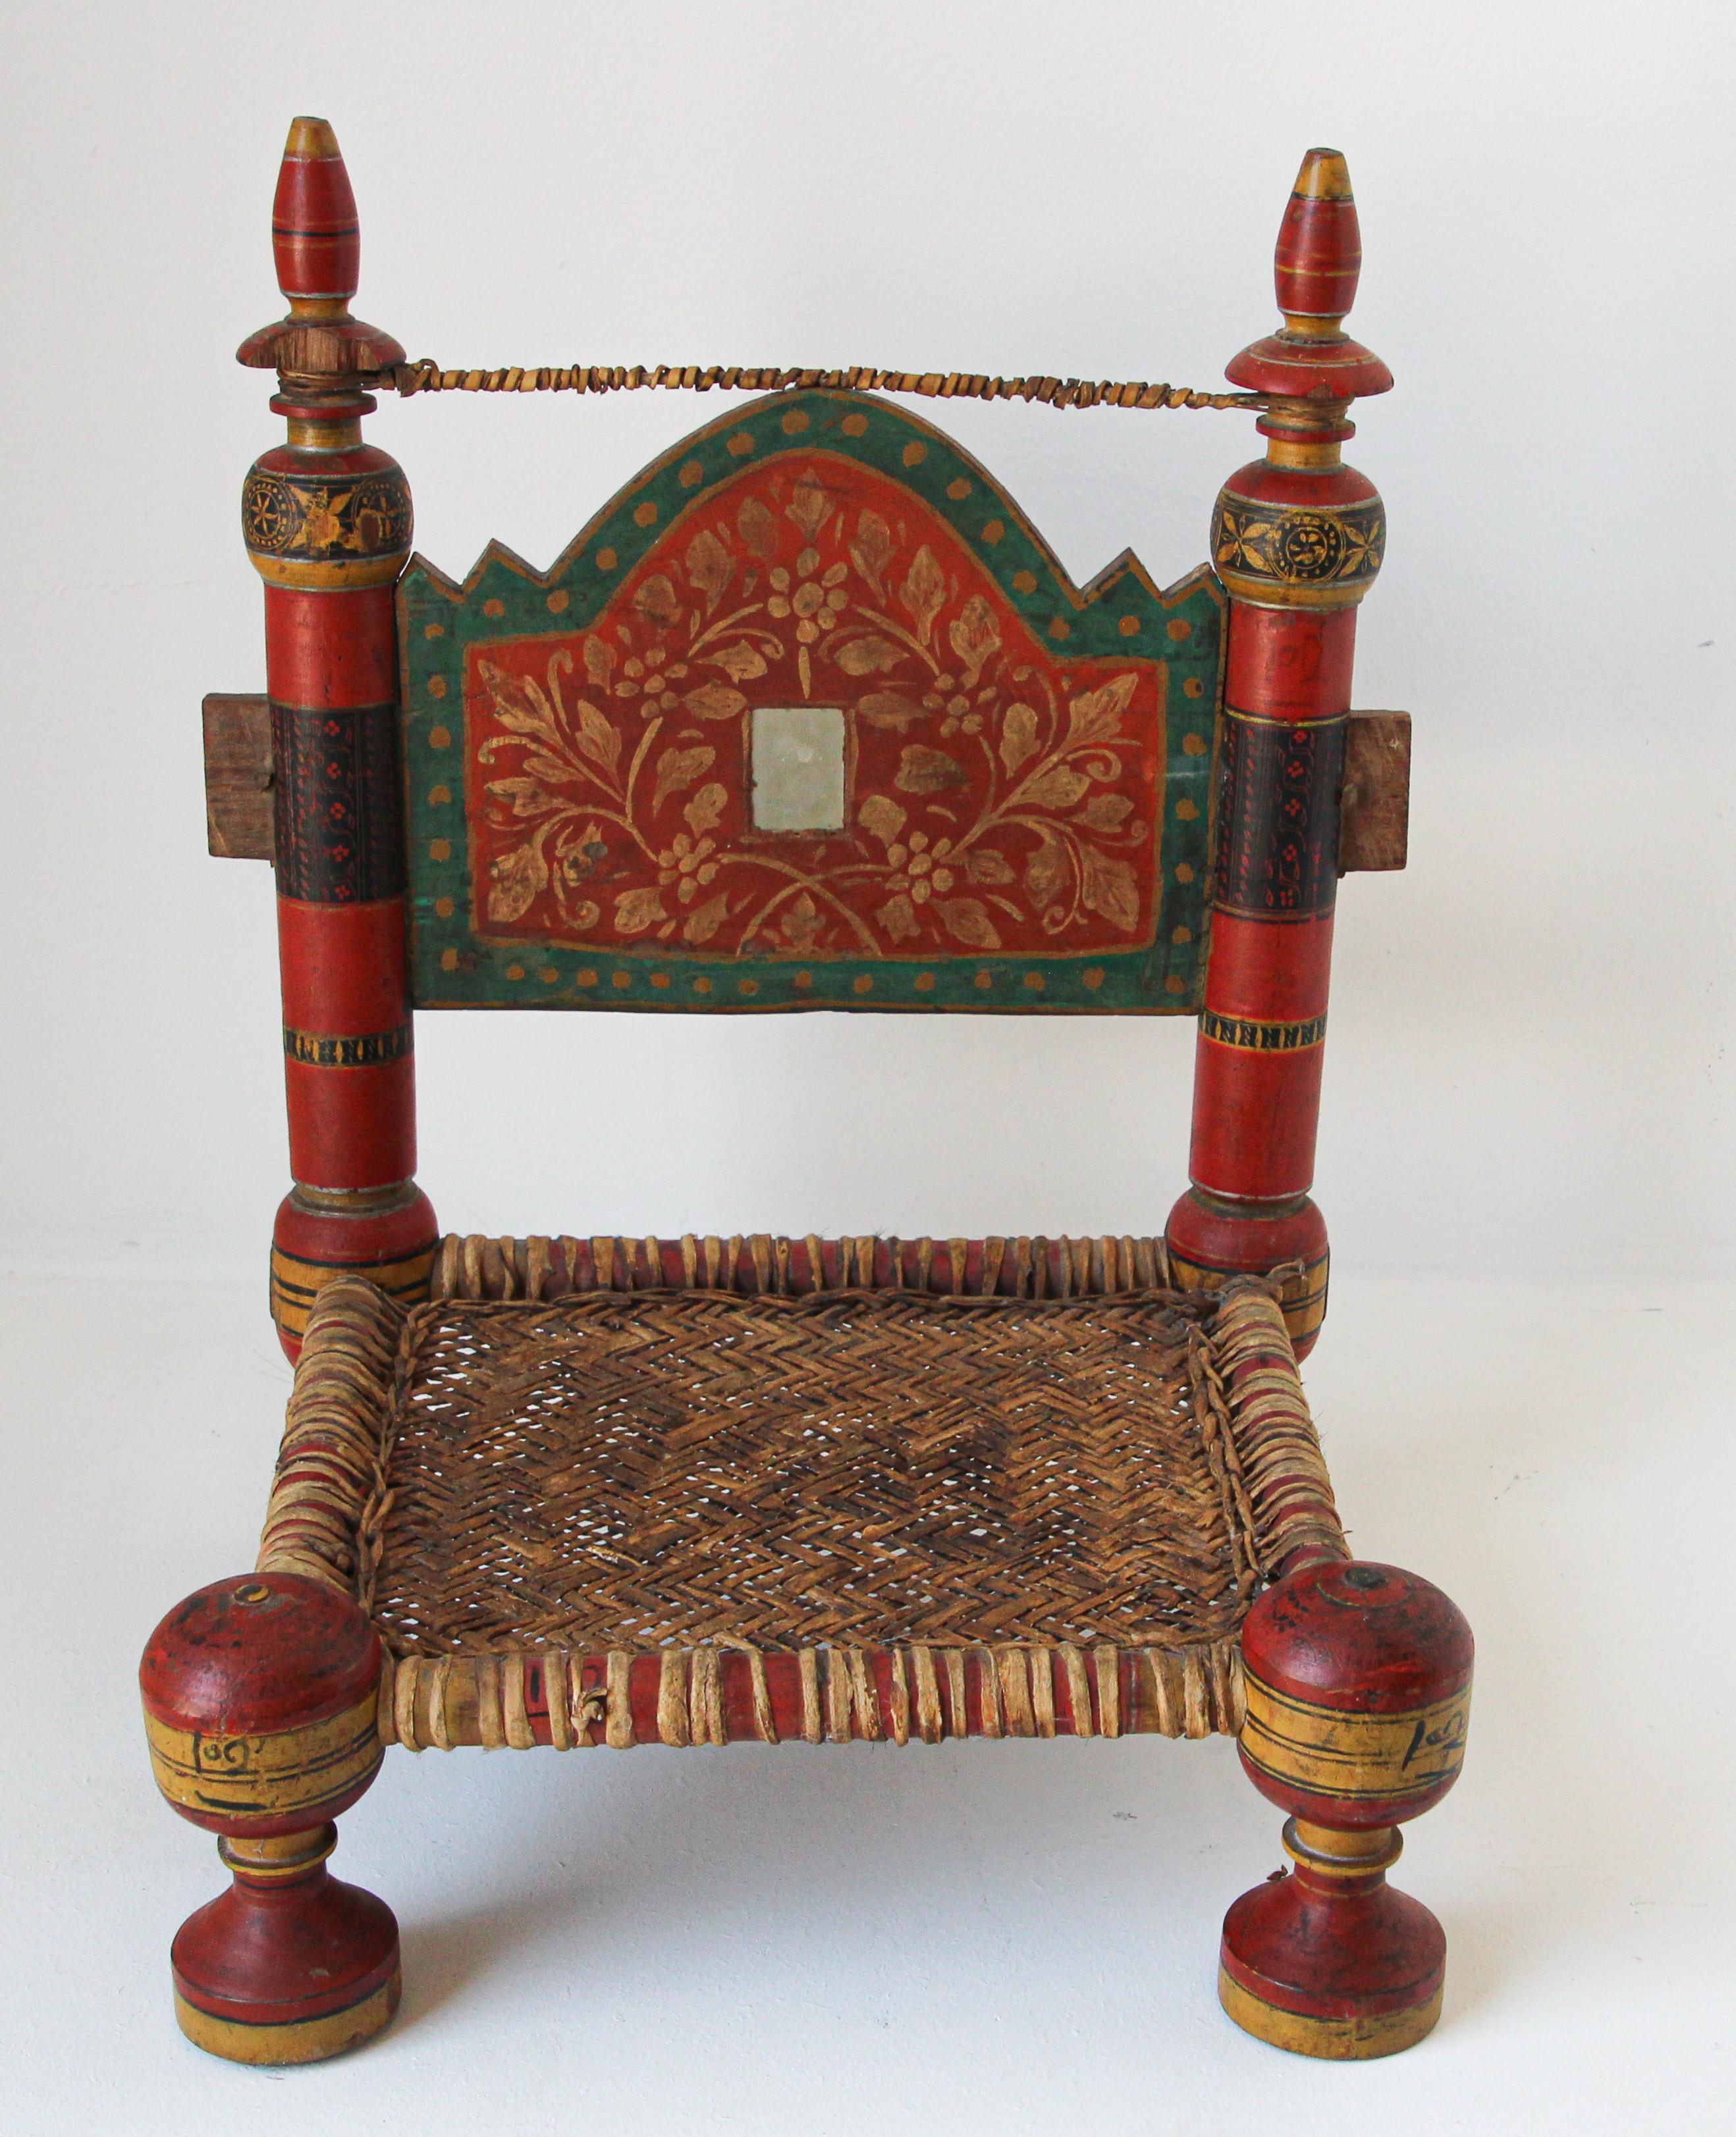 Indian Rajasthani low chair with red, green, black and gold, with caned handwoven leather seat.
An antique Indian rustic low wooden chair from the 19th century. 
Charming our eyes with its rustic appearance, this low wooden chair features a straight